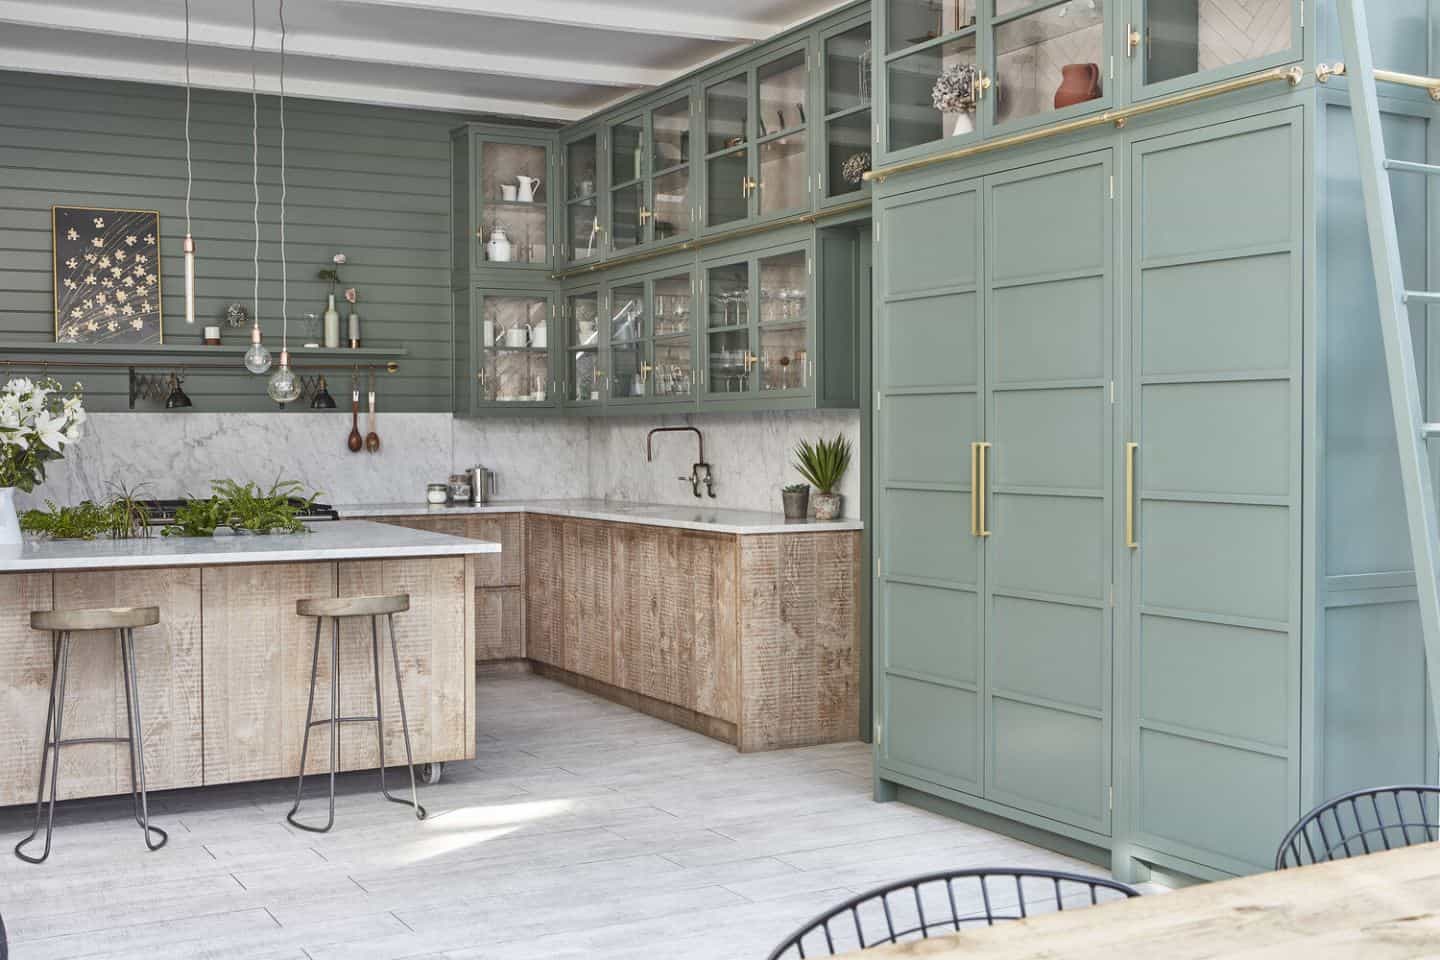 Urban rustic kitchen design features raw wood lower cabinets and mint green upper cabinets.